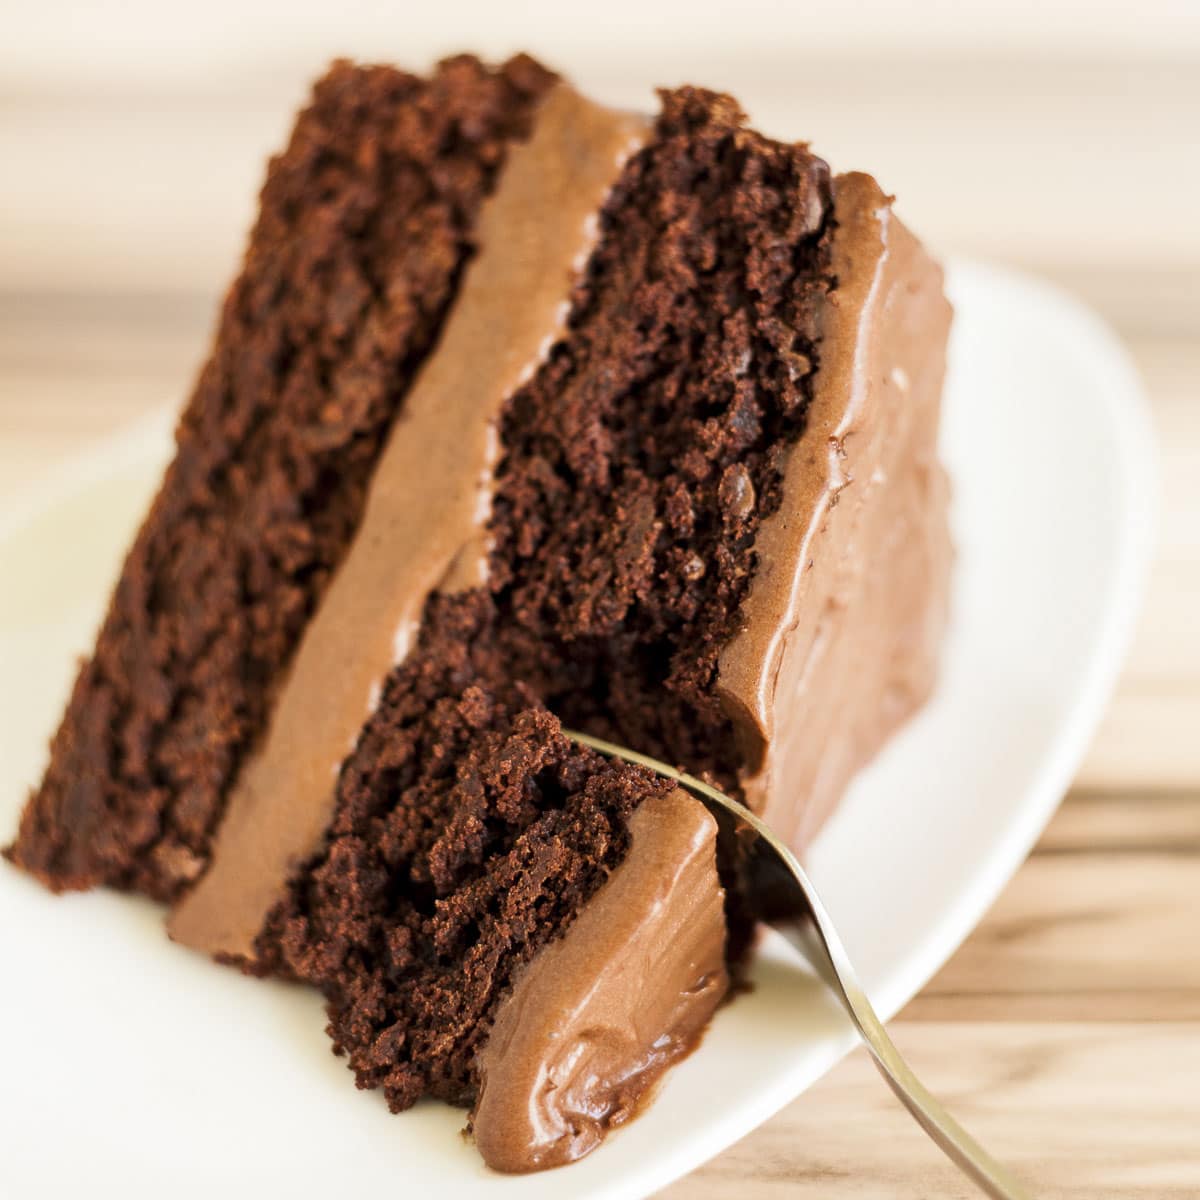 <p>Psyllium husk can be used as an egg replacement to bind ingredients in baked dishes. Simply mix it in a 1:1 ratio as a substitute for eggs, or mix the powder directly into dry ingredients, as seen in this vegan chocolate cake recipe. The result is a delicious, moist cake despite being vegan and gluten-free.</p><p>Get the recipe from My Pure Plants: <a href="https://mypureplants.com/vegan-chocolate-cake-gluten-free/">vegan chocolate cake</a></p>